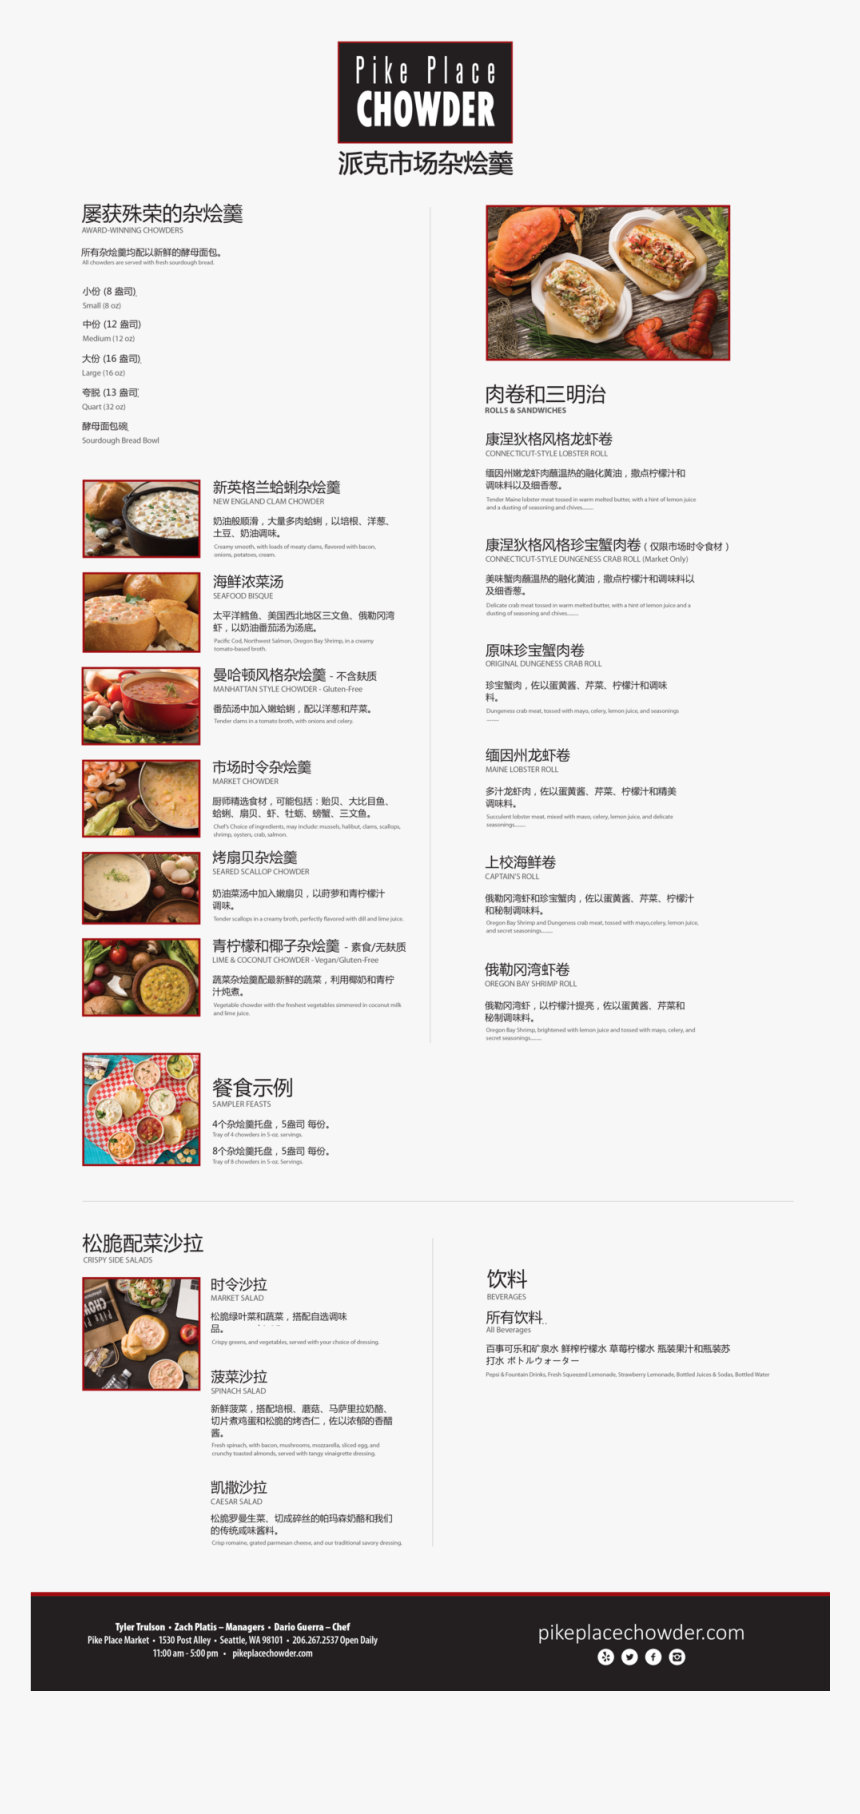 Ppc Chinese Web Menu - Pike Place Chowder, HD Png Download, Free Download